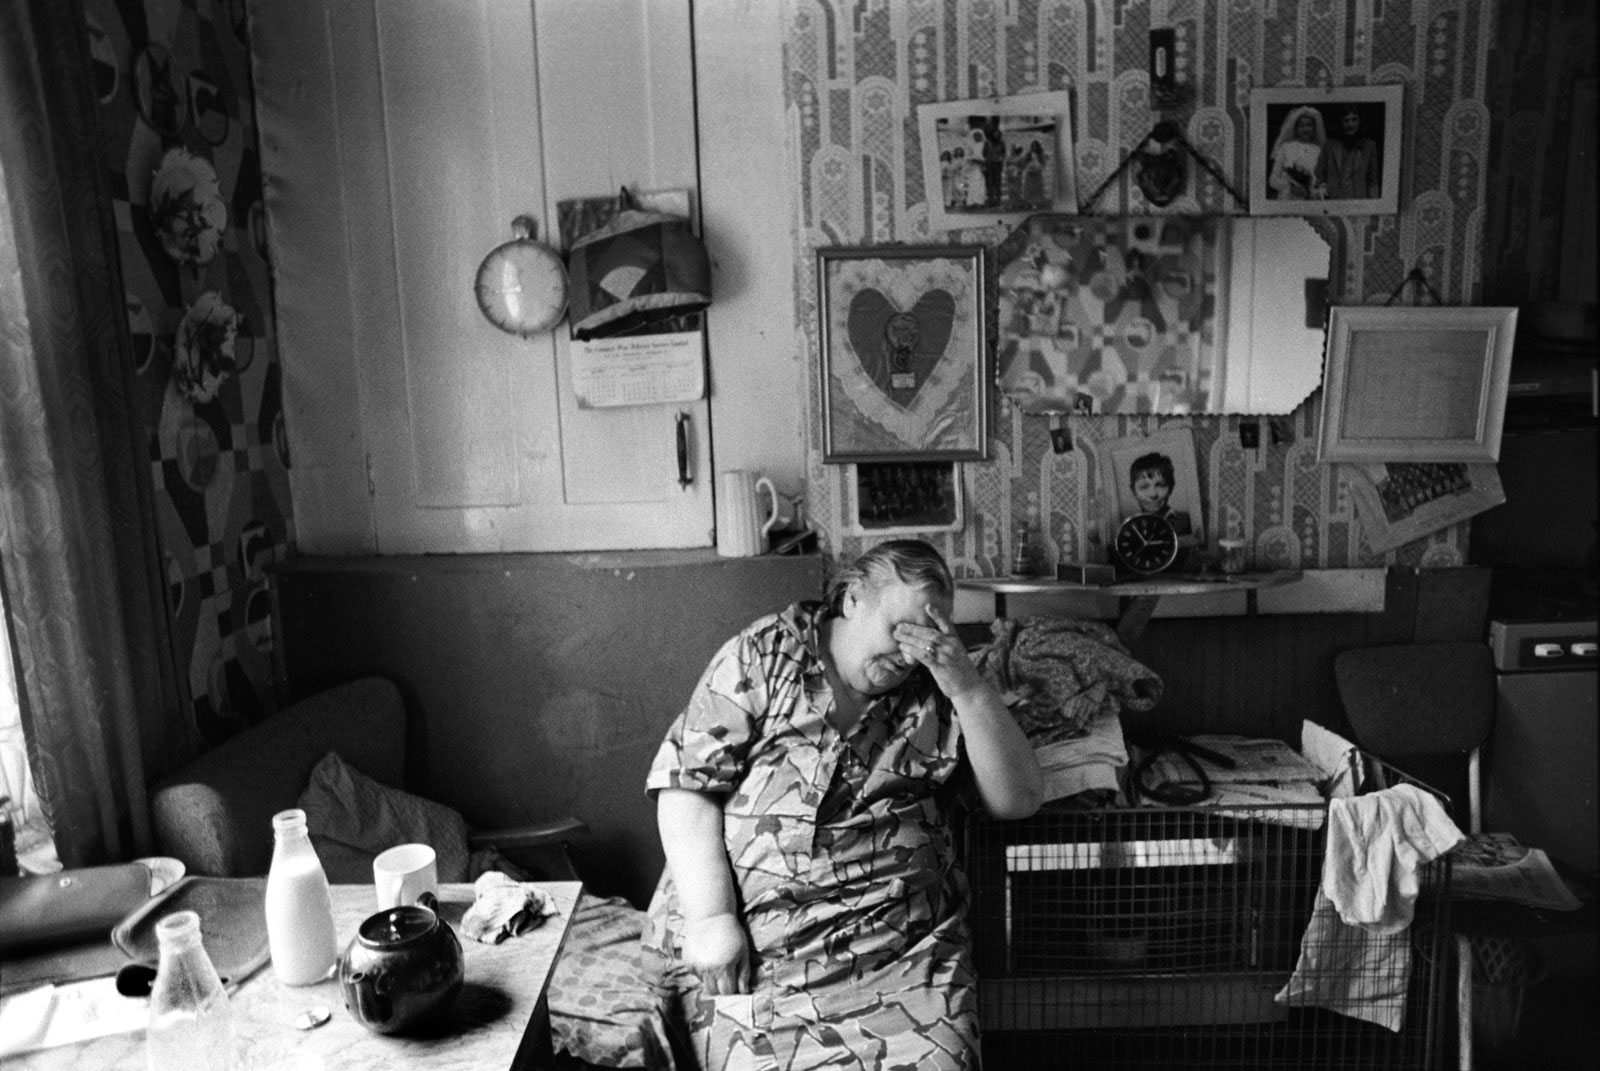 Peabody estate, woman at home, East London, 1975